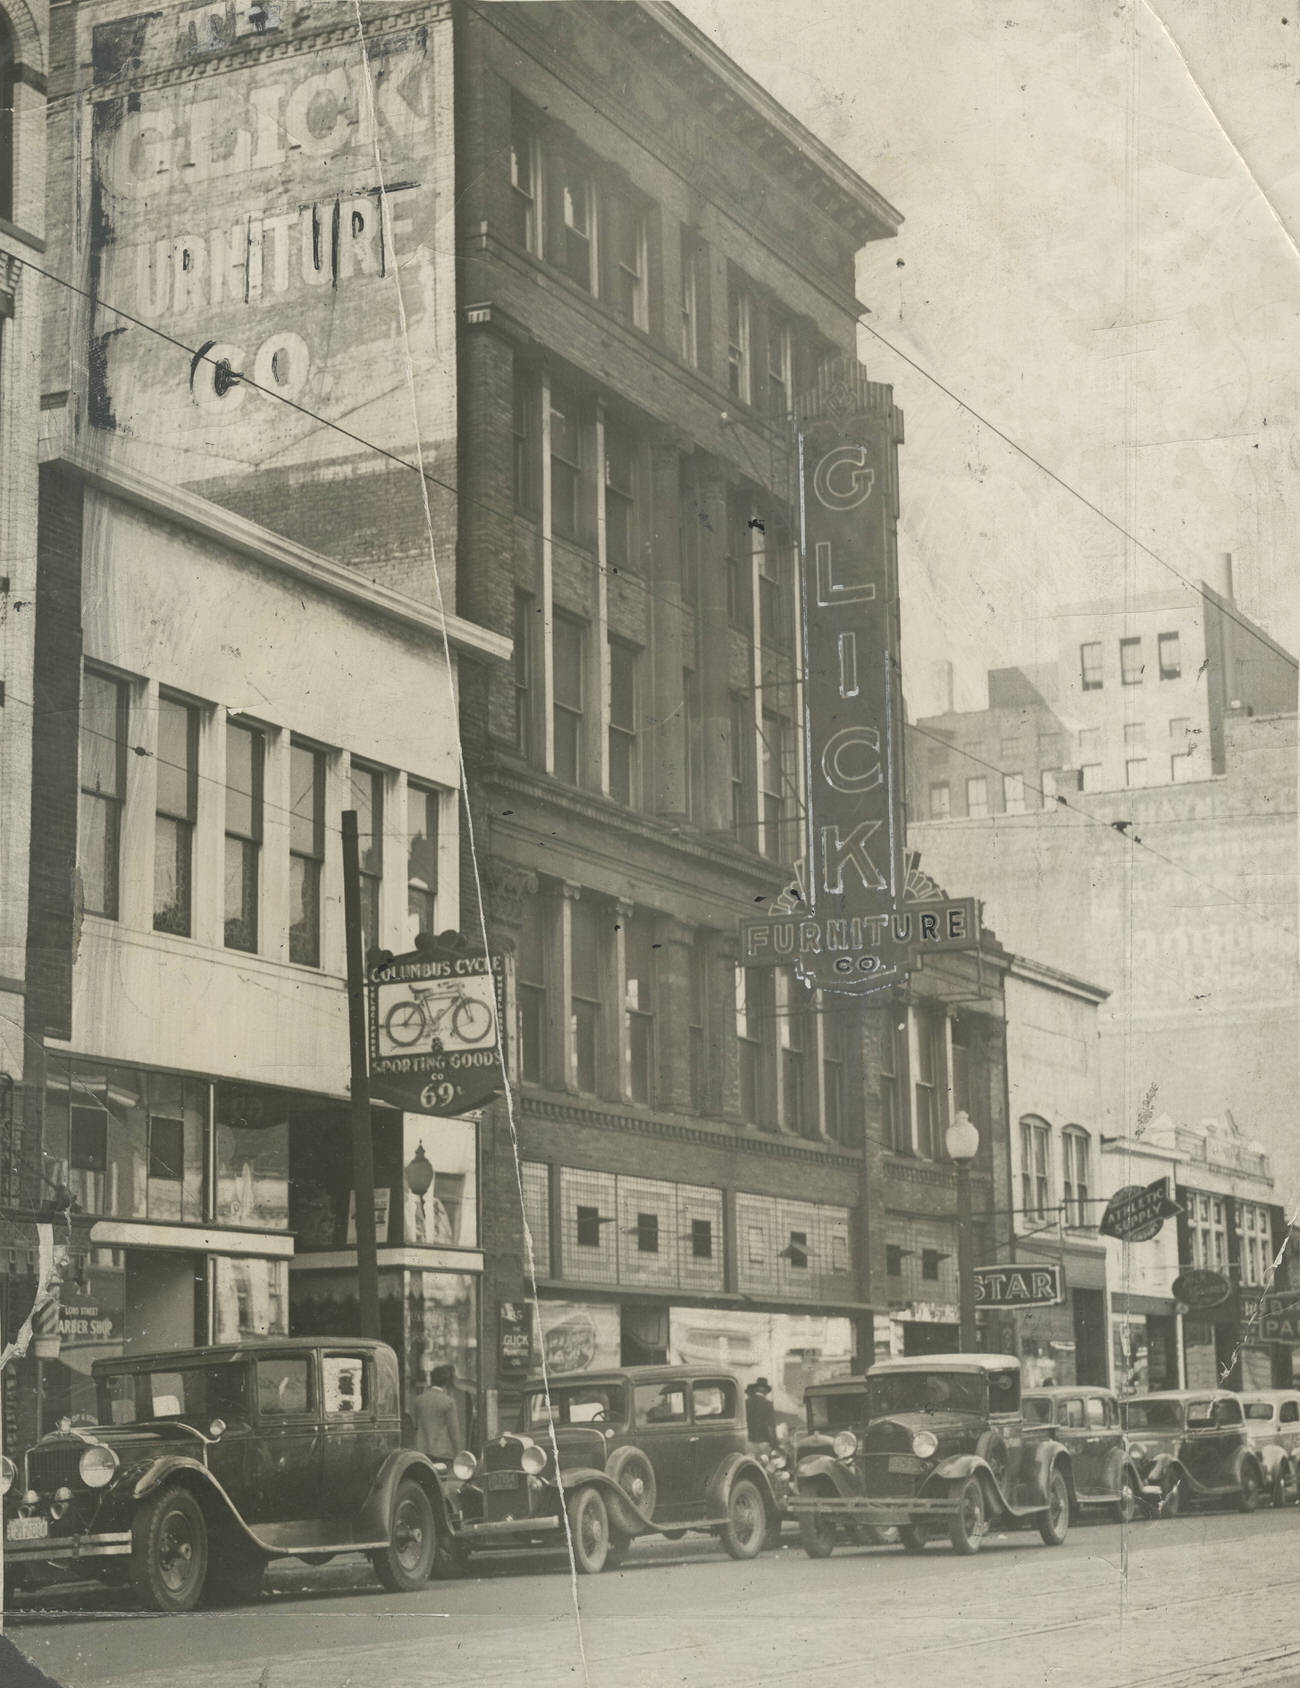 Glick Furniture Company and neighboring businesses on East Long Street, Columbus, 1907